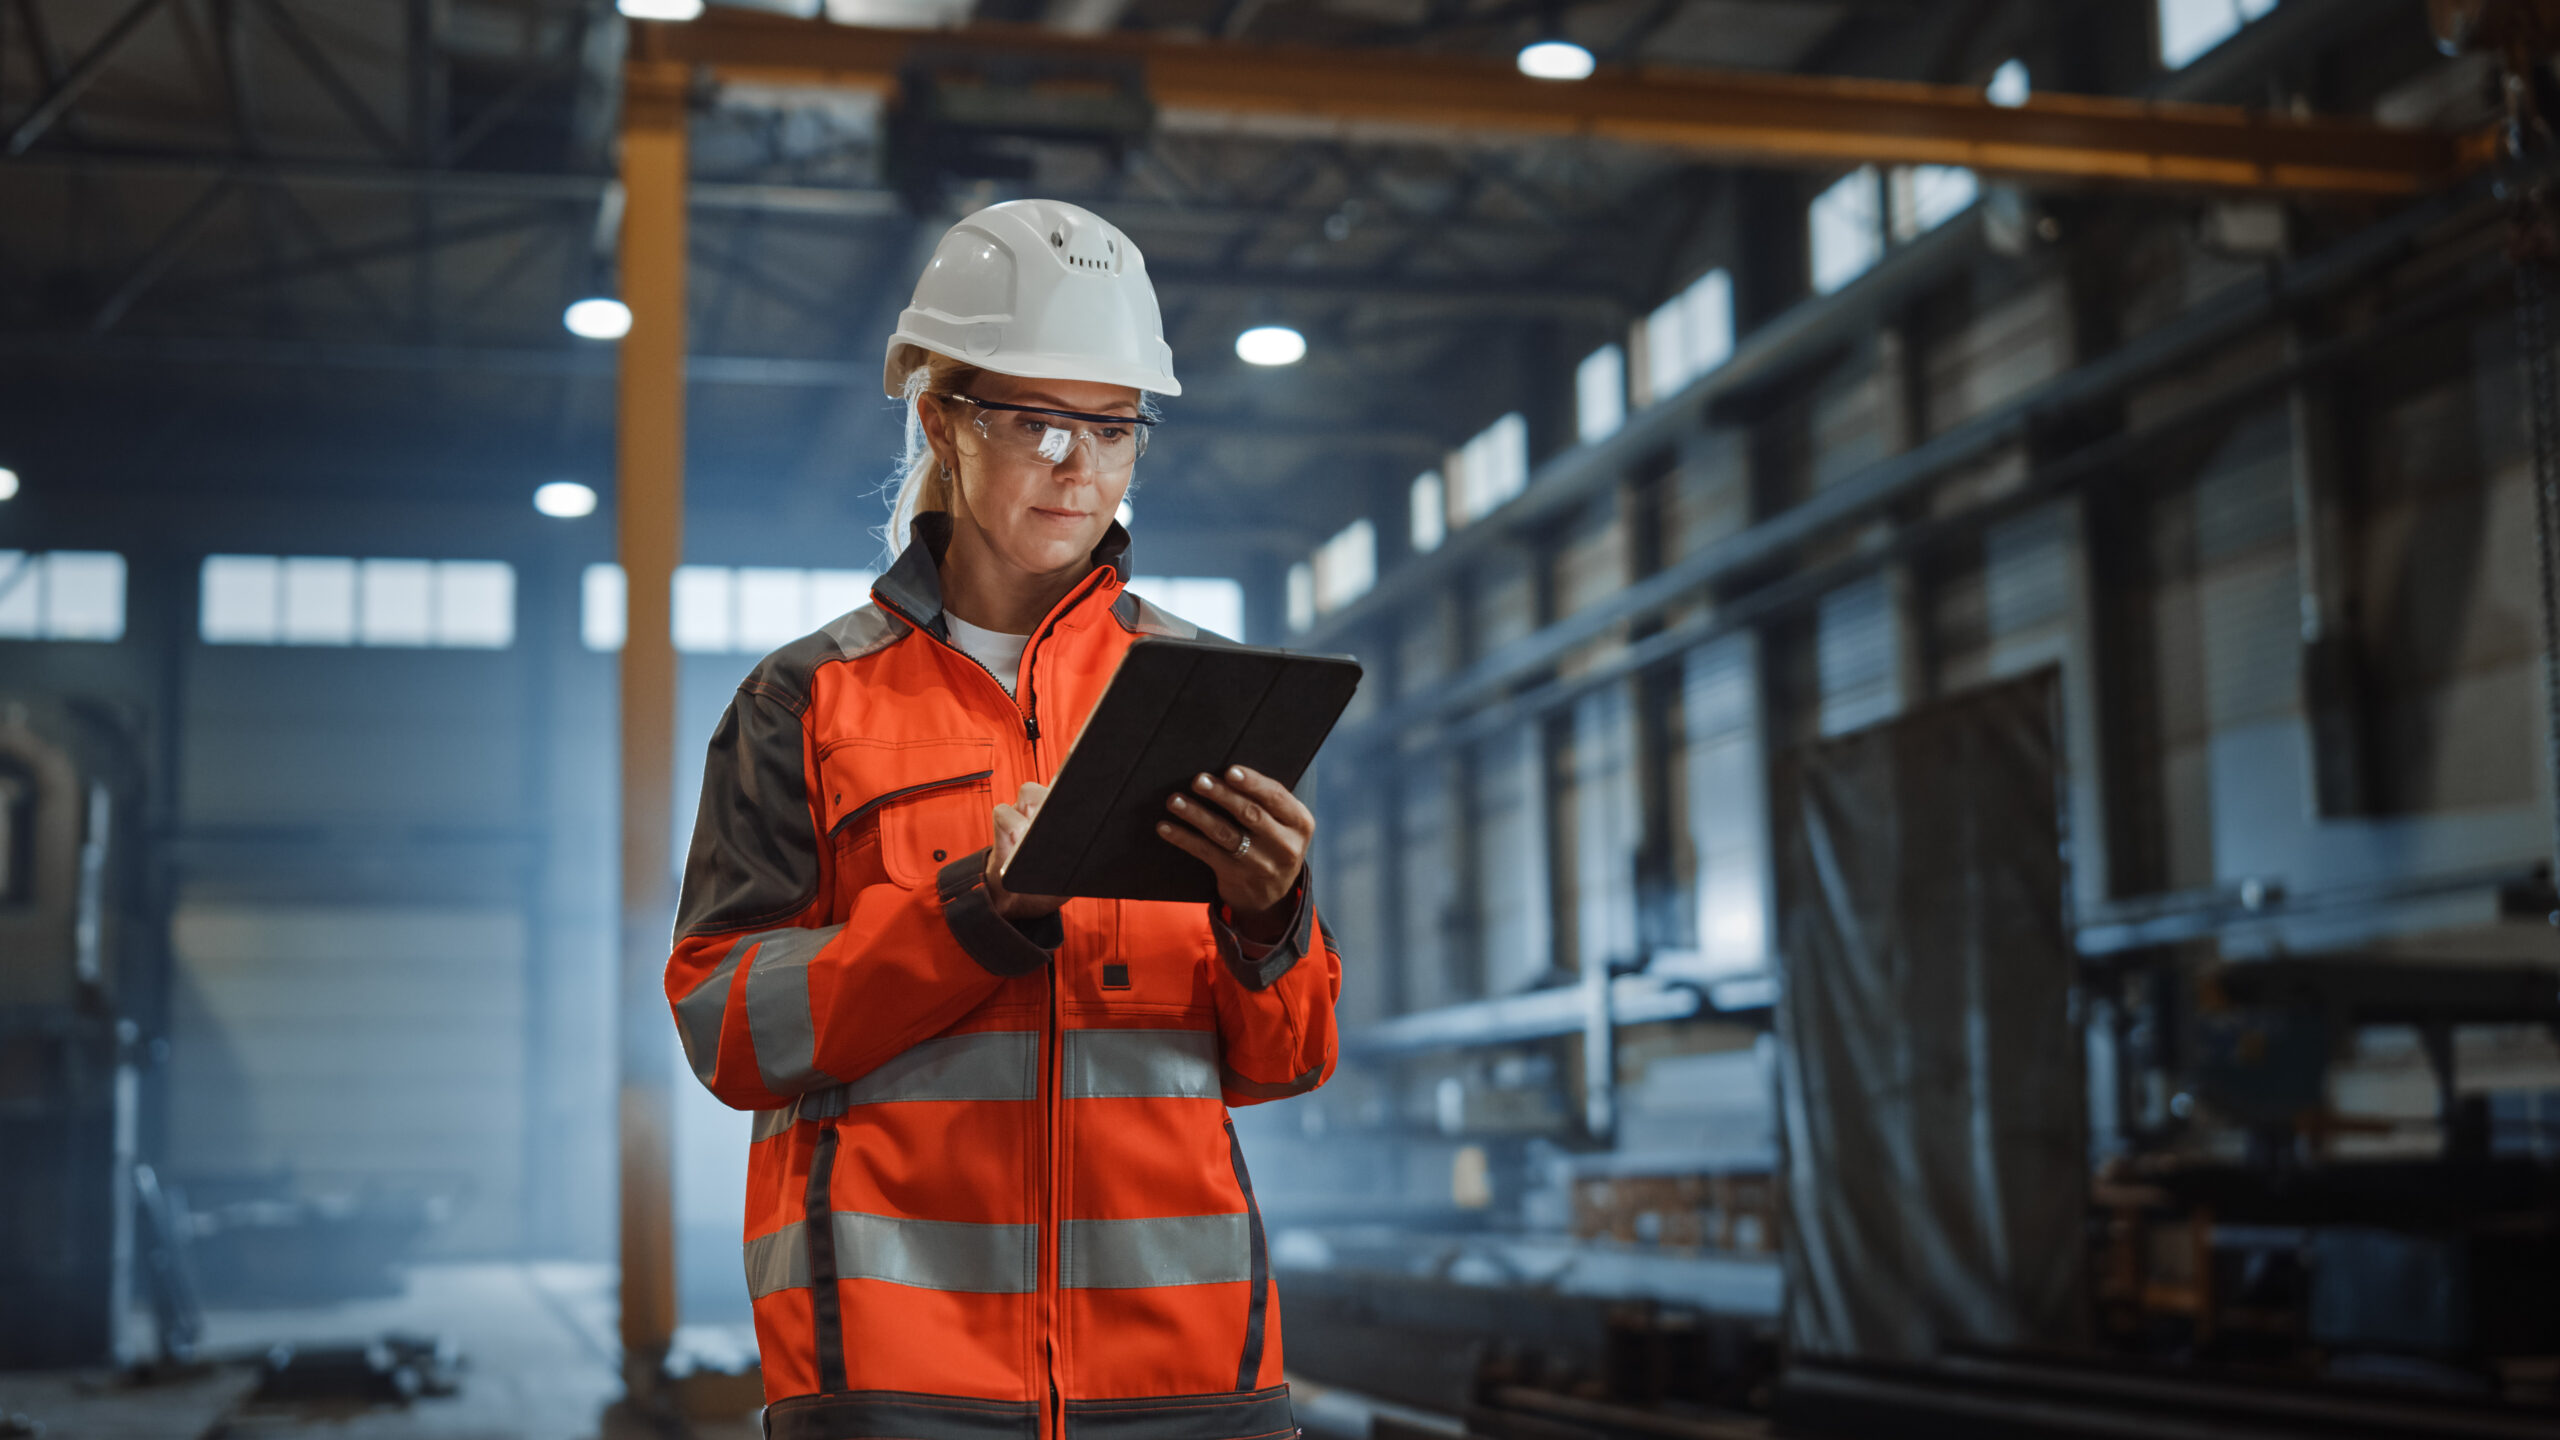 Modernizing Applications in manufacturing organizations blog feature image. A woman in a hard hat and vest checks data on her tablet on the manufacturing floor